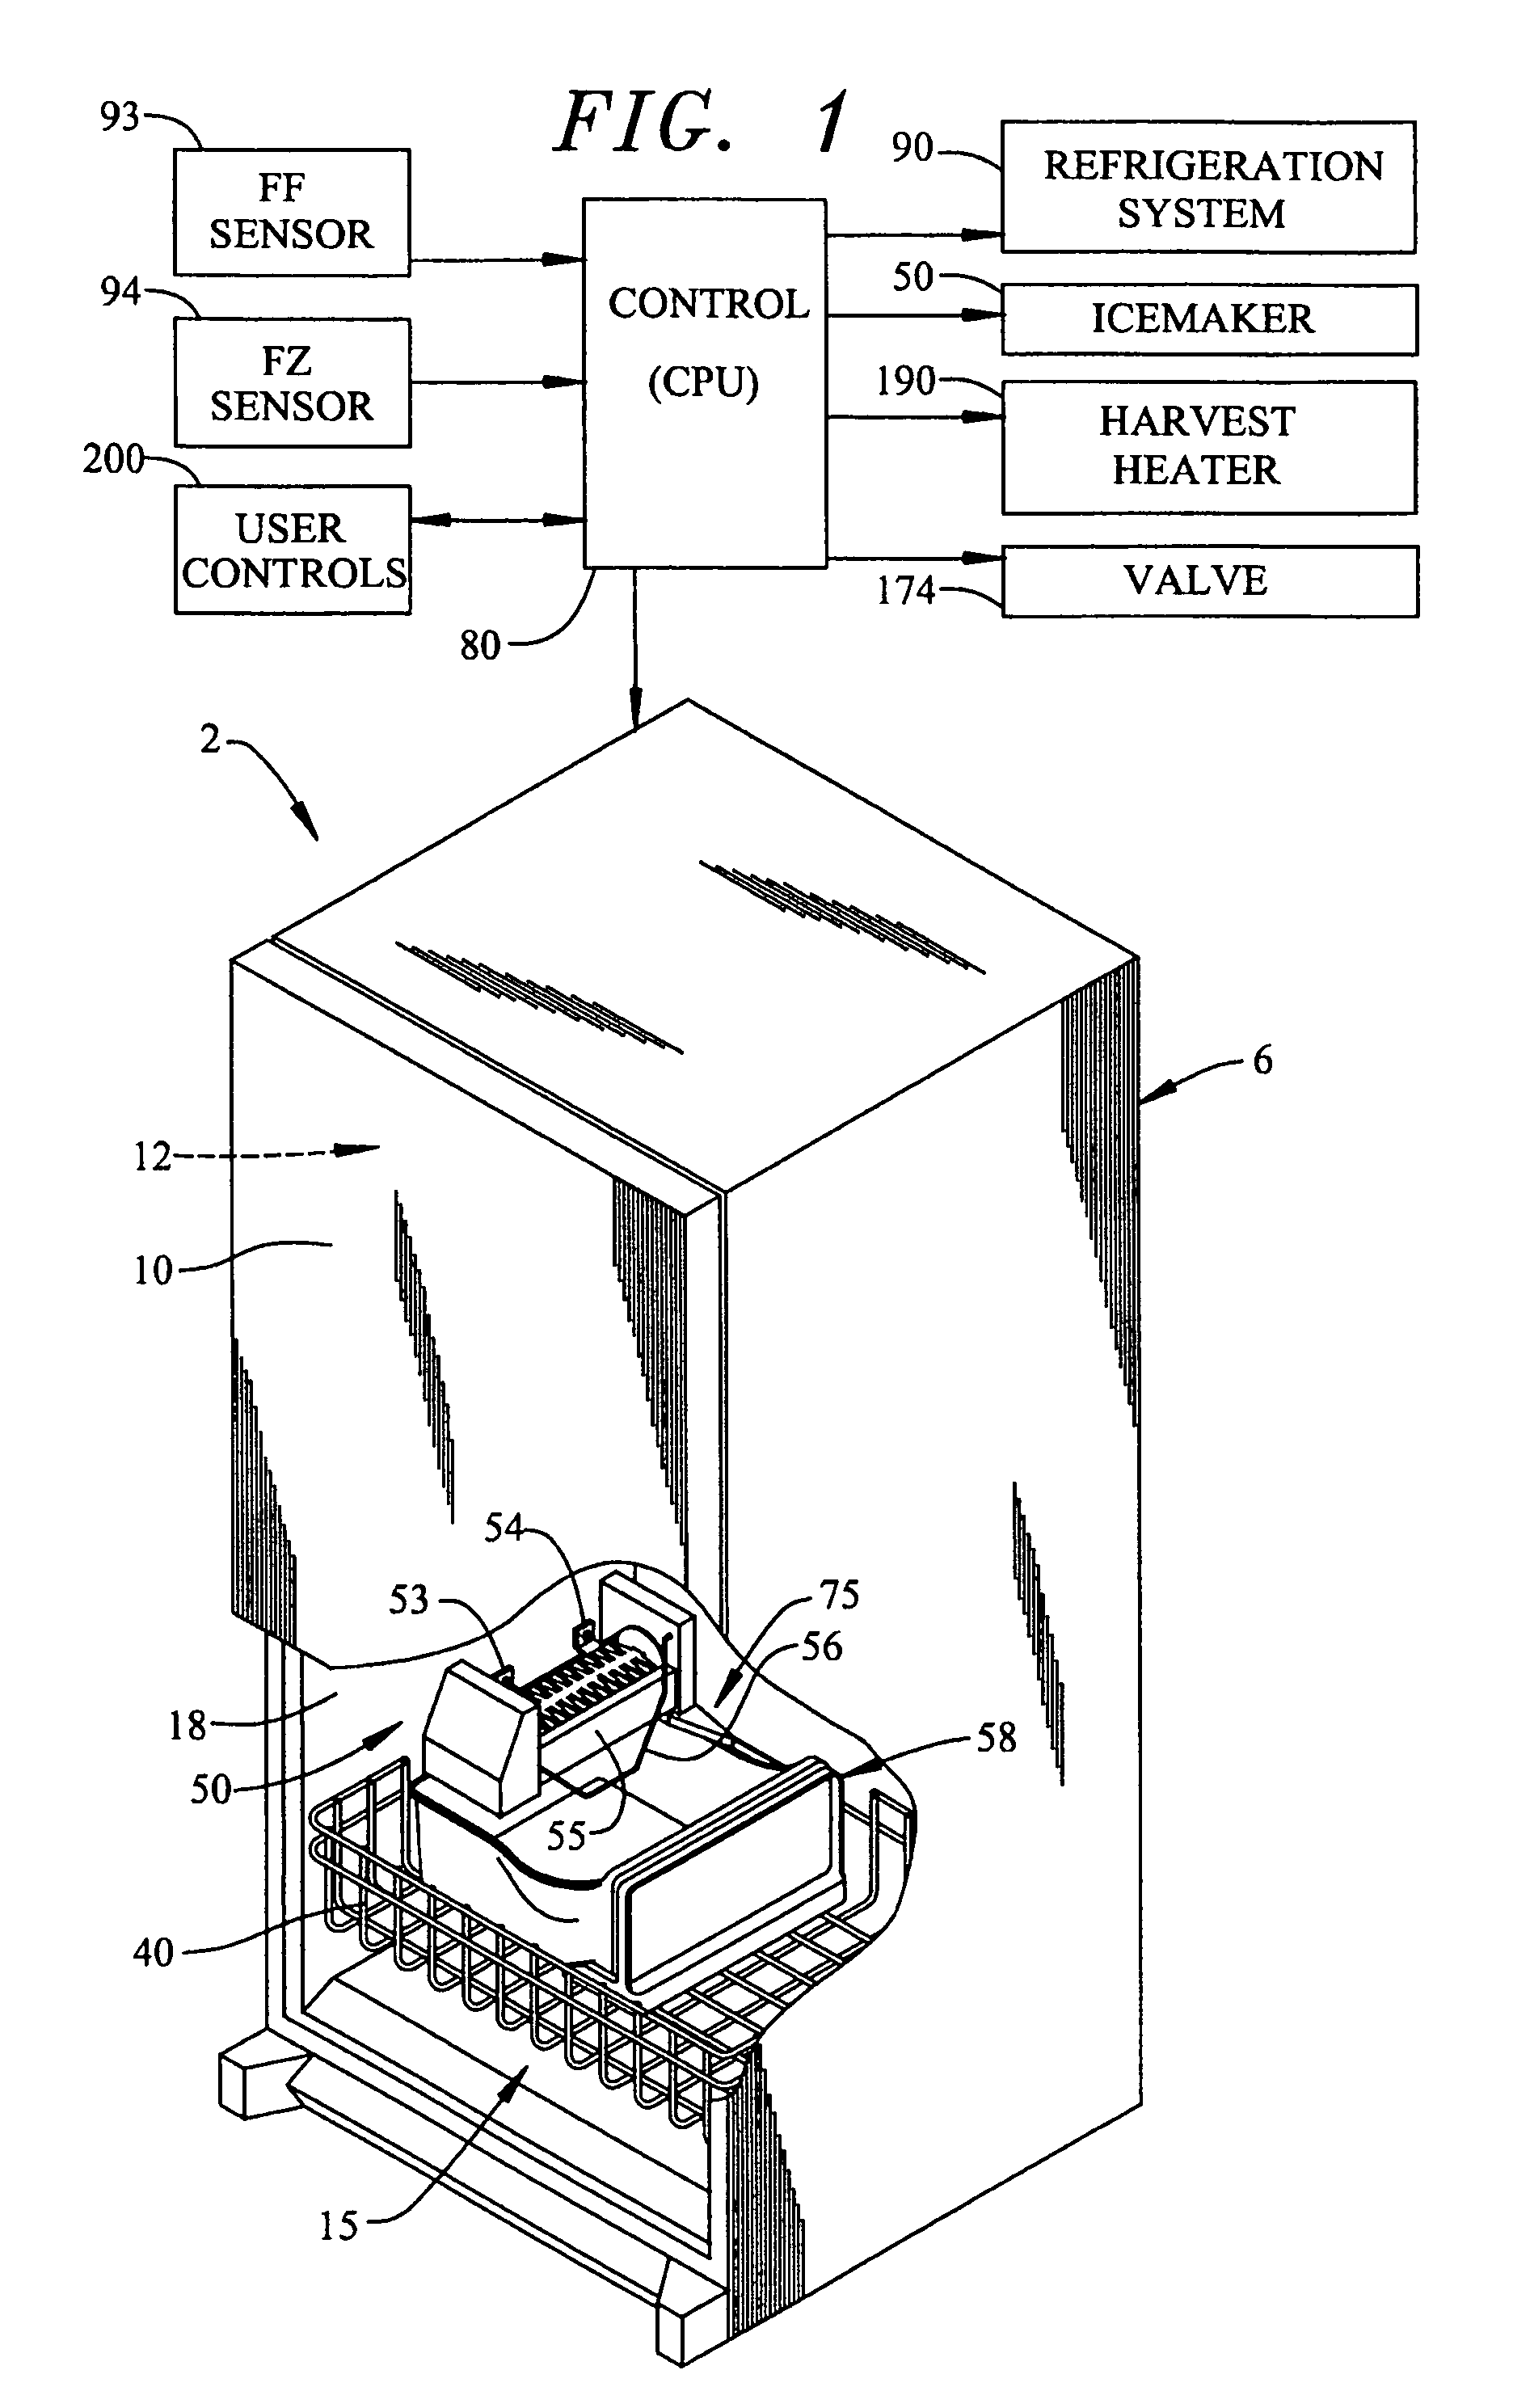 Icemaker system for a refrigerator